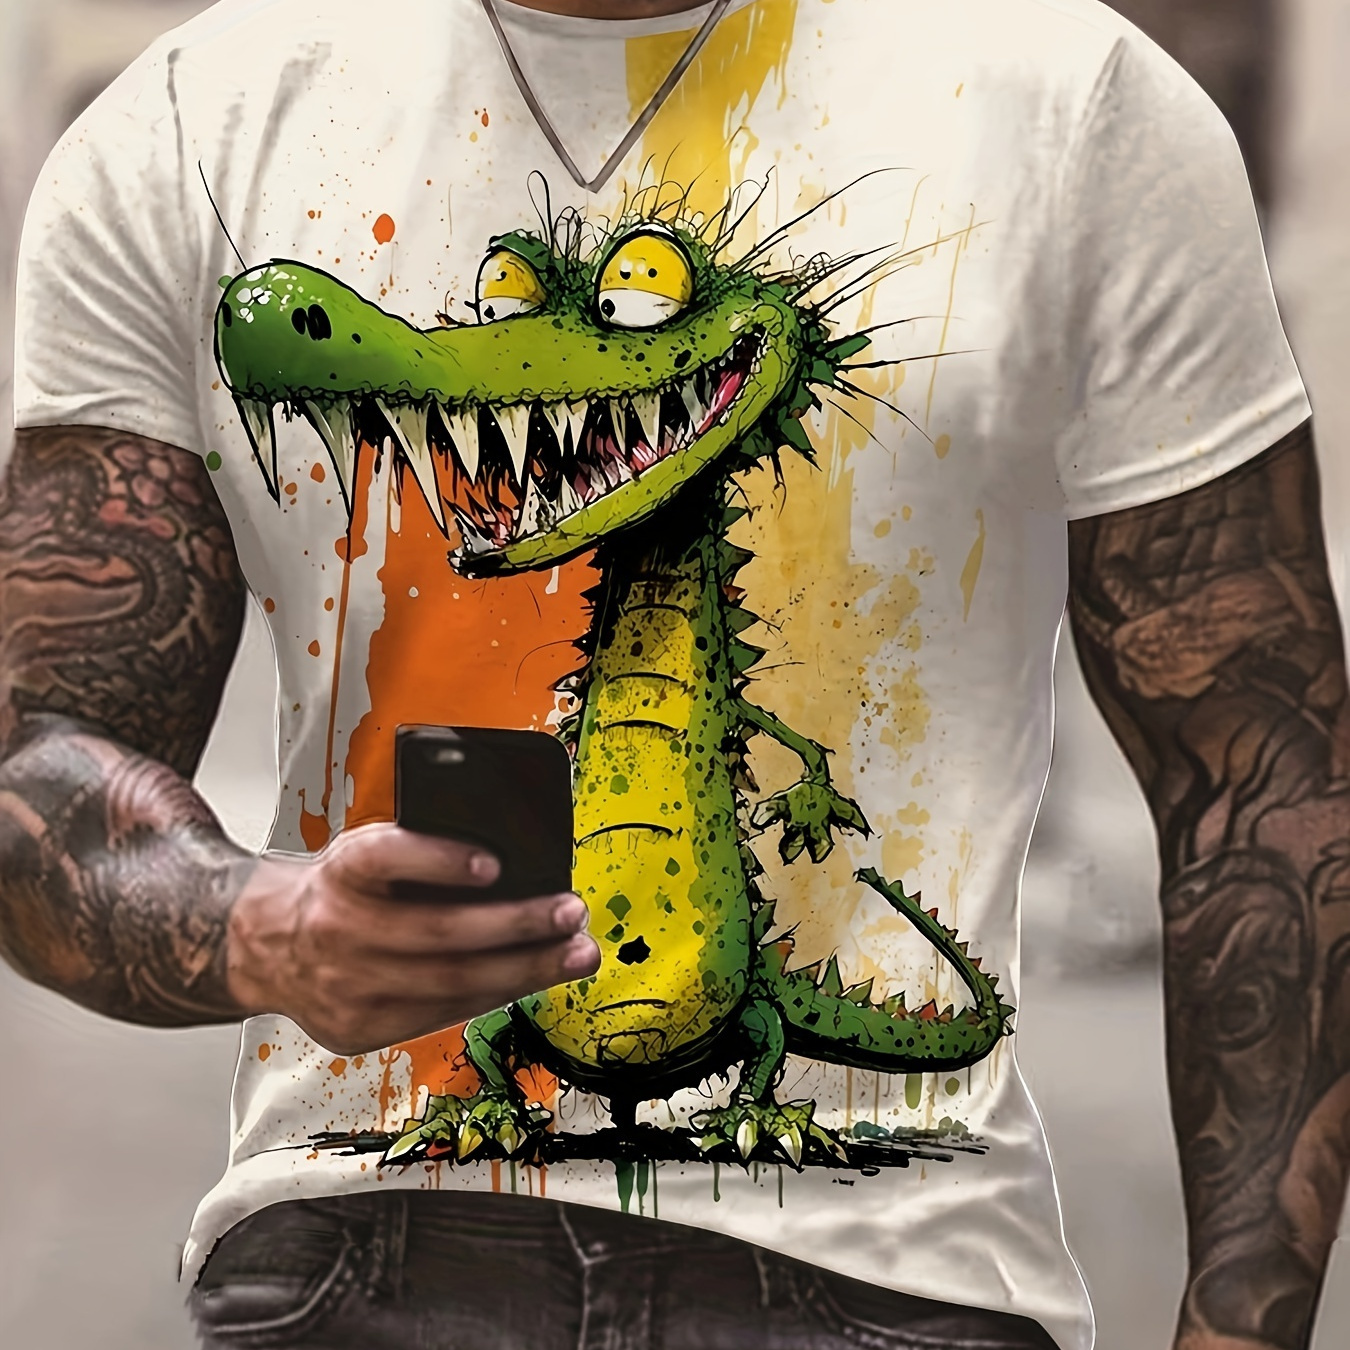 

Comic Style Crocodile And Paint Mark Pattern Crew Neck And Short Sleeve T-shirt, Casual And Chic Tops For Men's Summer Street Wear